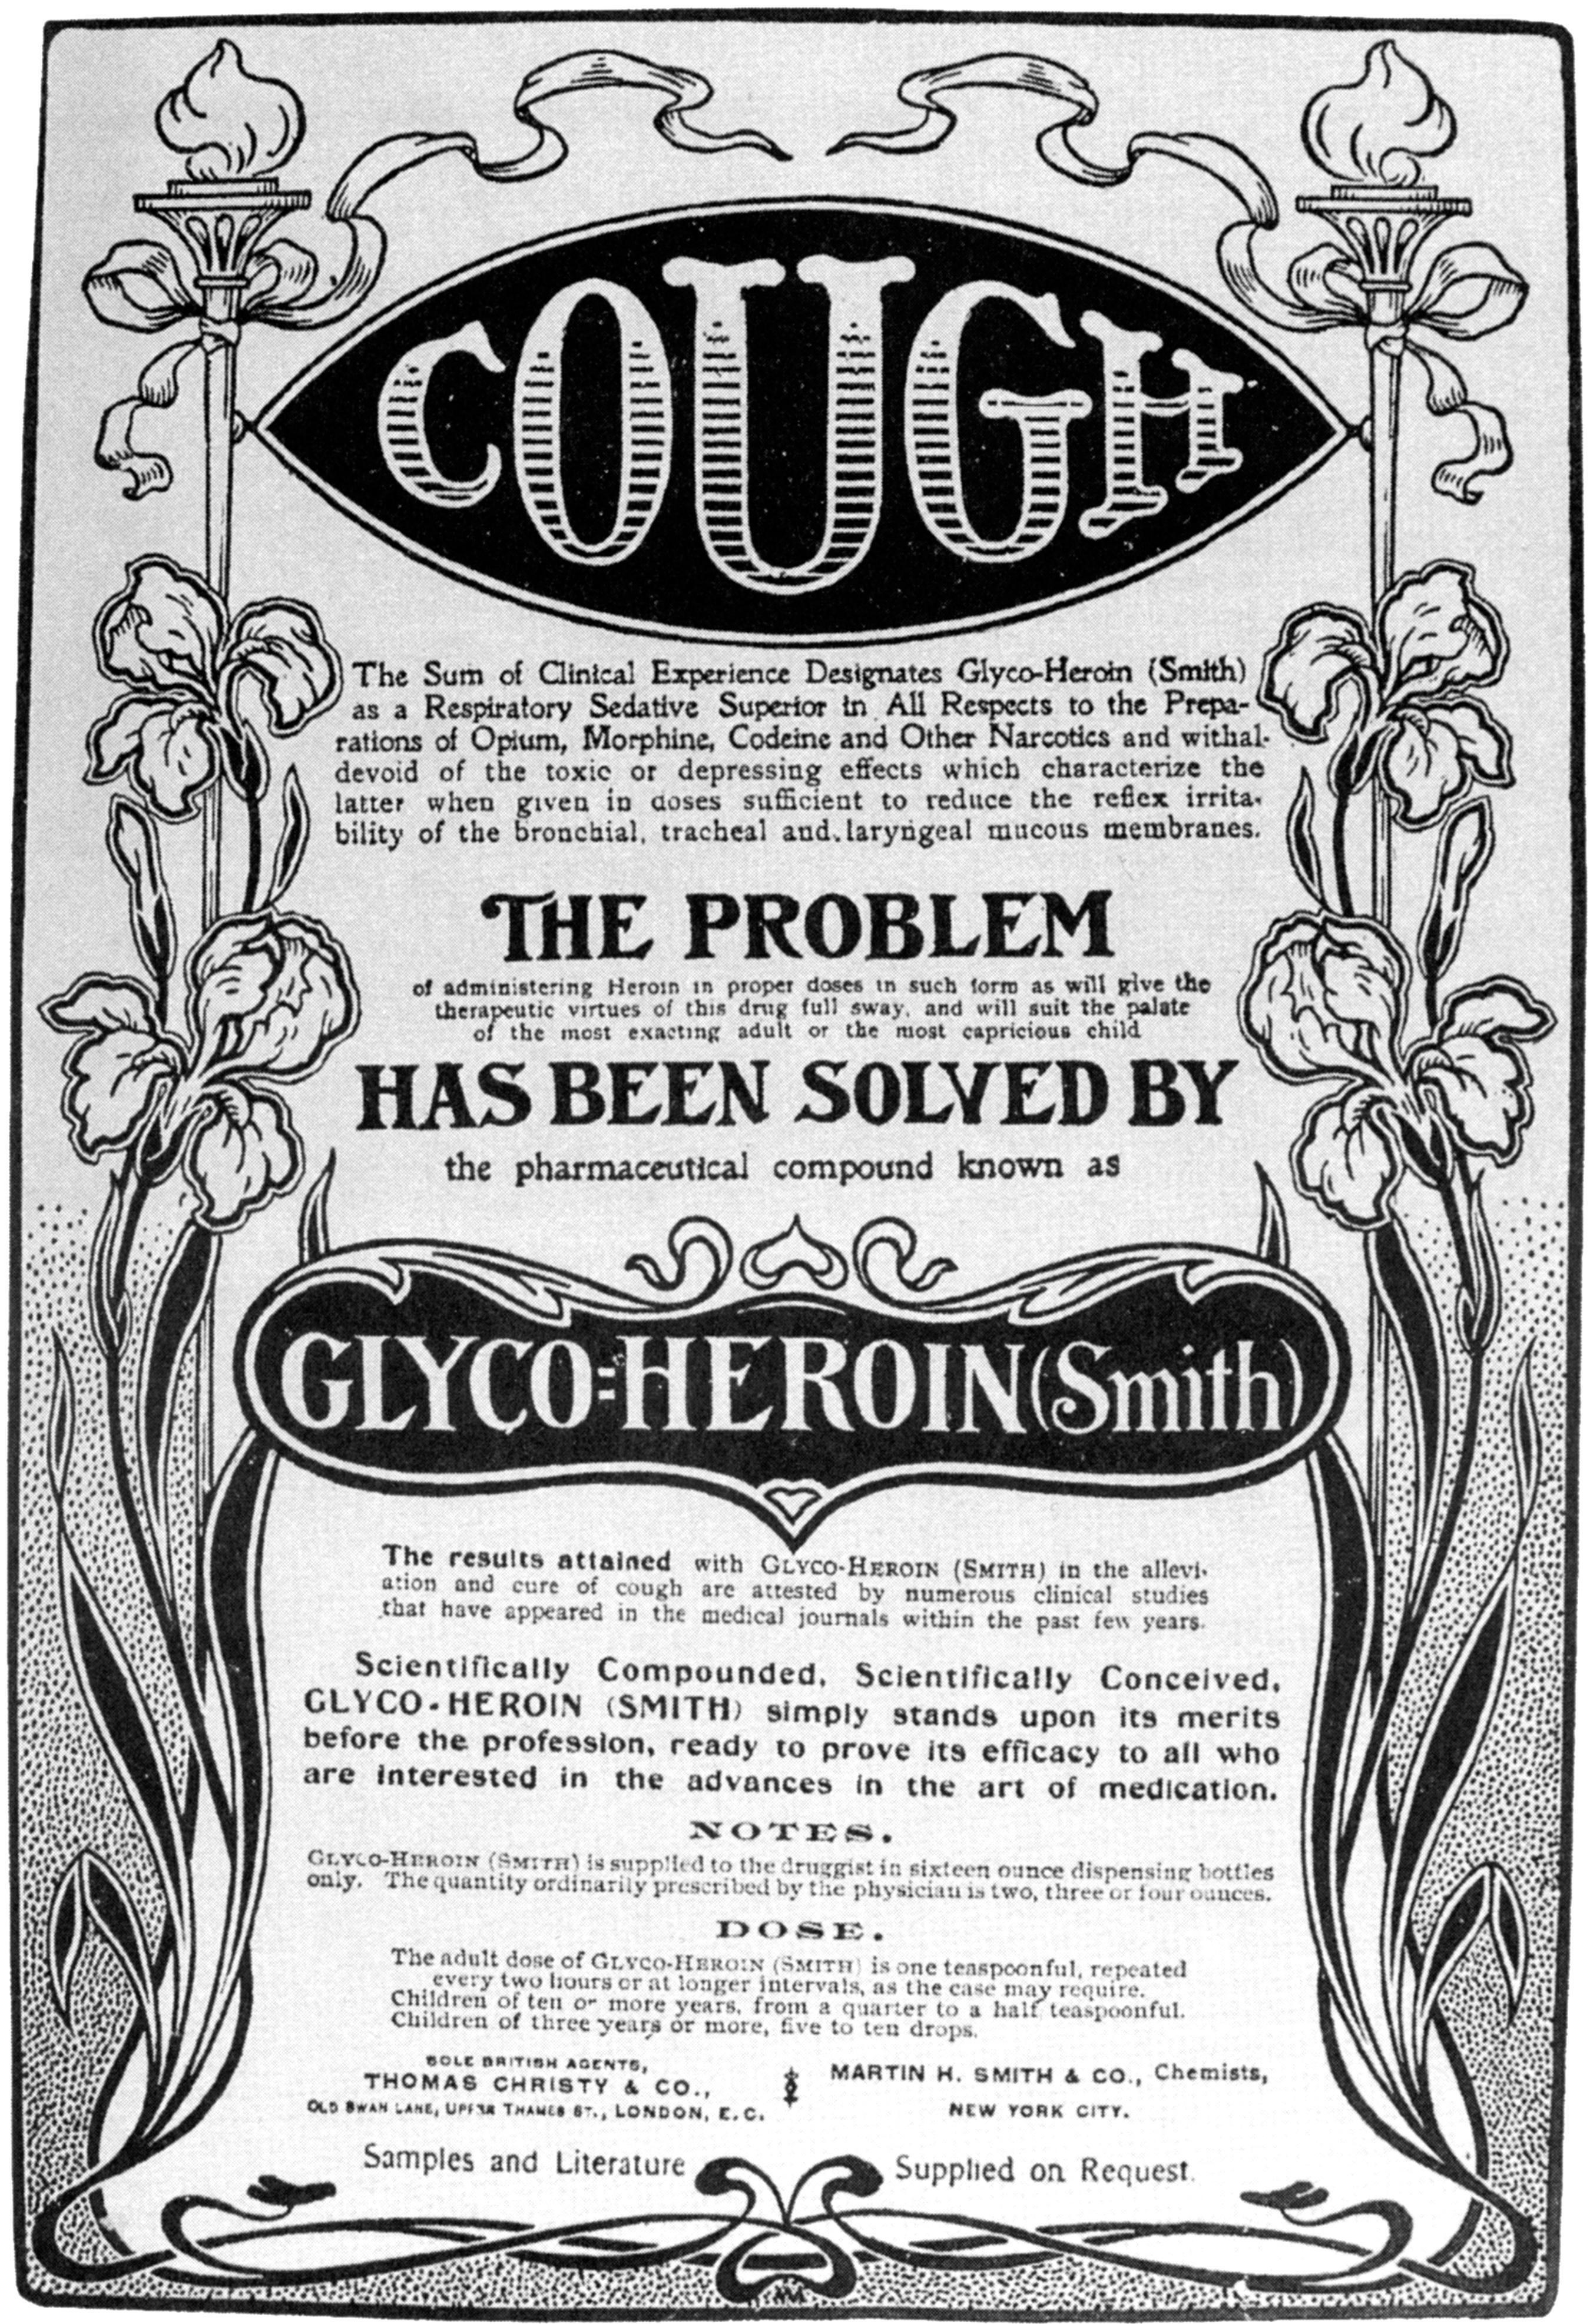 Scientifically compounded, scientifically conceived Glyco-Heroin (Smith): adult dose is 1 teaspoonful every two hours; children 3 or more, 5 to 10 drops for coughs